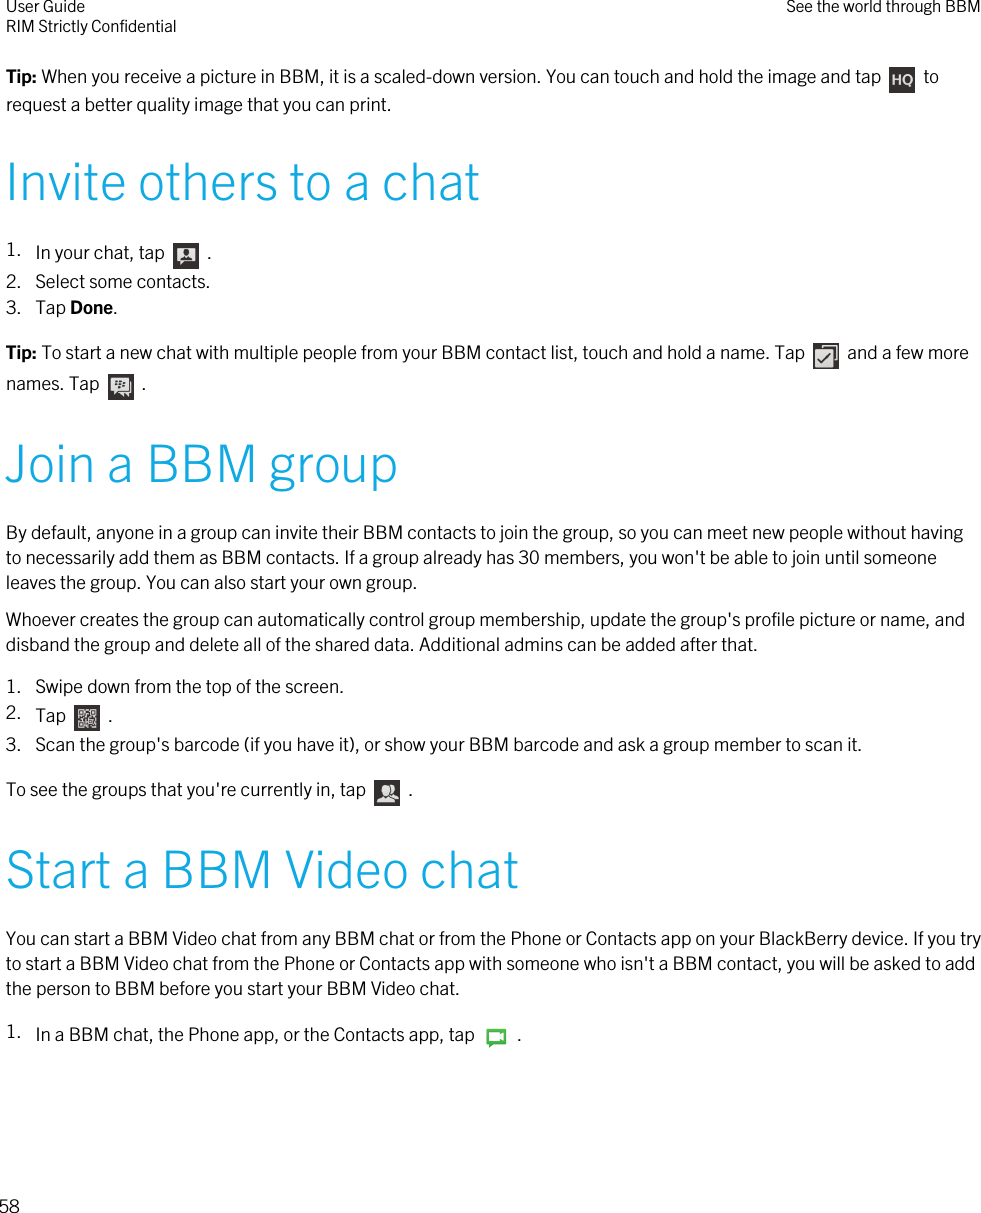 Tip: When you receive a picture in BBM, it is a scaled-down version. You can touch and hold the image and tap    torequest a better quality image that you can print.Invite others to a chat1. In your chat, tap    .2. Select some contacts.3. Tap Done.Tip: To start a new chat with multiple people from your BBM contact list, touch and hold a name. Tap    and a few morenames. Tap    .Join a BBM groupBy default, anyone in a group can invite their BBM contacts to join the group, so you can meet new people without havingto necessarily add them as BBM contacts. If a group already has 30 members, you won&apos;t be able to join until someoneleaves the group. You can also start your own group.Whoever creates the group can automatically control group membership, update the group&apos;s profile picture or name, anddisband the group and delete all of the shared data. Additional admins can be added after that.1. Swipe down from the top of the screen.2. Tap    .3. Scan the group&apos;s barcode (if you have it), or show your BBM barcode and ask a group member to scan it.To see the groups that you&apos;re currently in, tap    .Start a BBM Video chatYou can start a BBM Video chat from any BBM chat or from the Phone or Contacts app on your BlackBerry device. If you tryto start a BBM Video chat from the Phone or Contacts app with someone who isn&apos;t a BBM contact, you will be asked to addthe person to BBM before you start your BBM Video chat.1. In a BBM chat, the Phone app, or the Contacts app, tap    .User GuideRIM Strictly Confidential See the world through BBM58